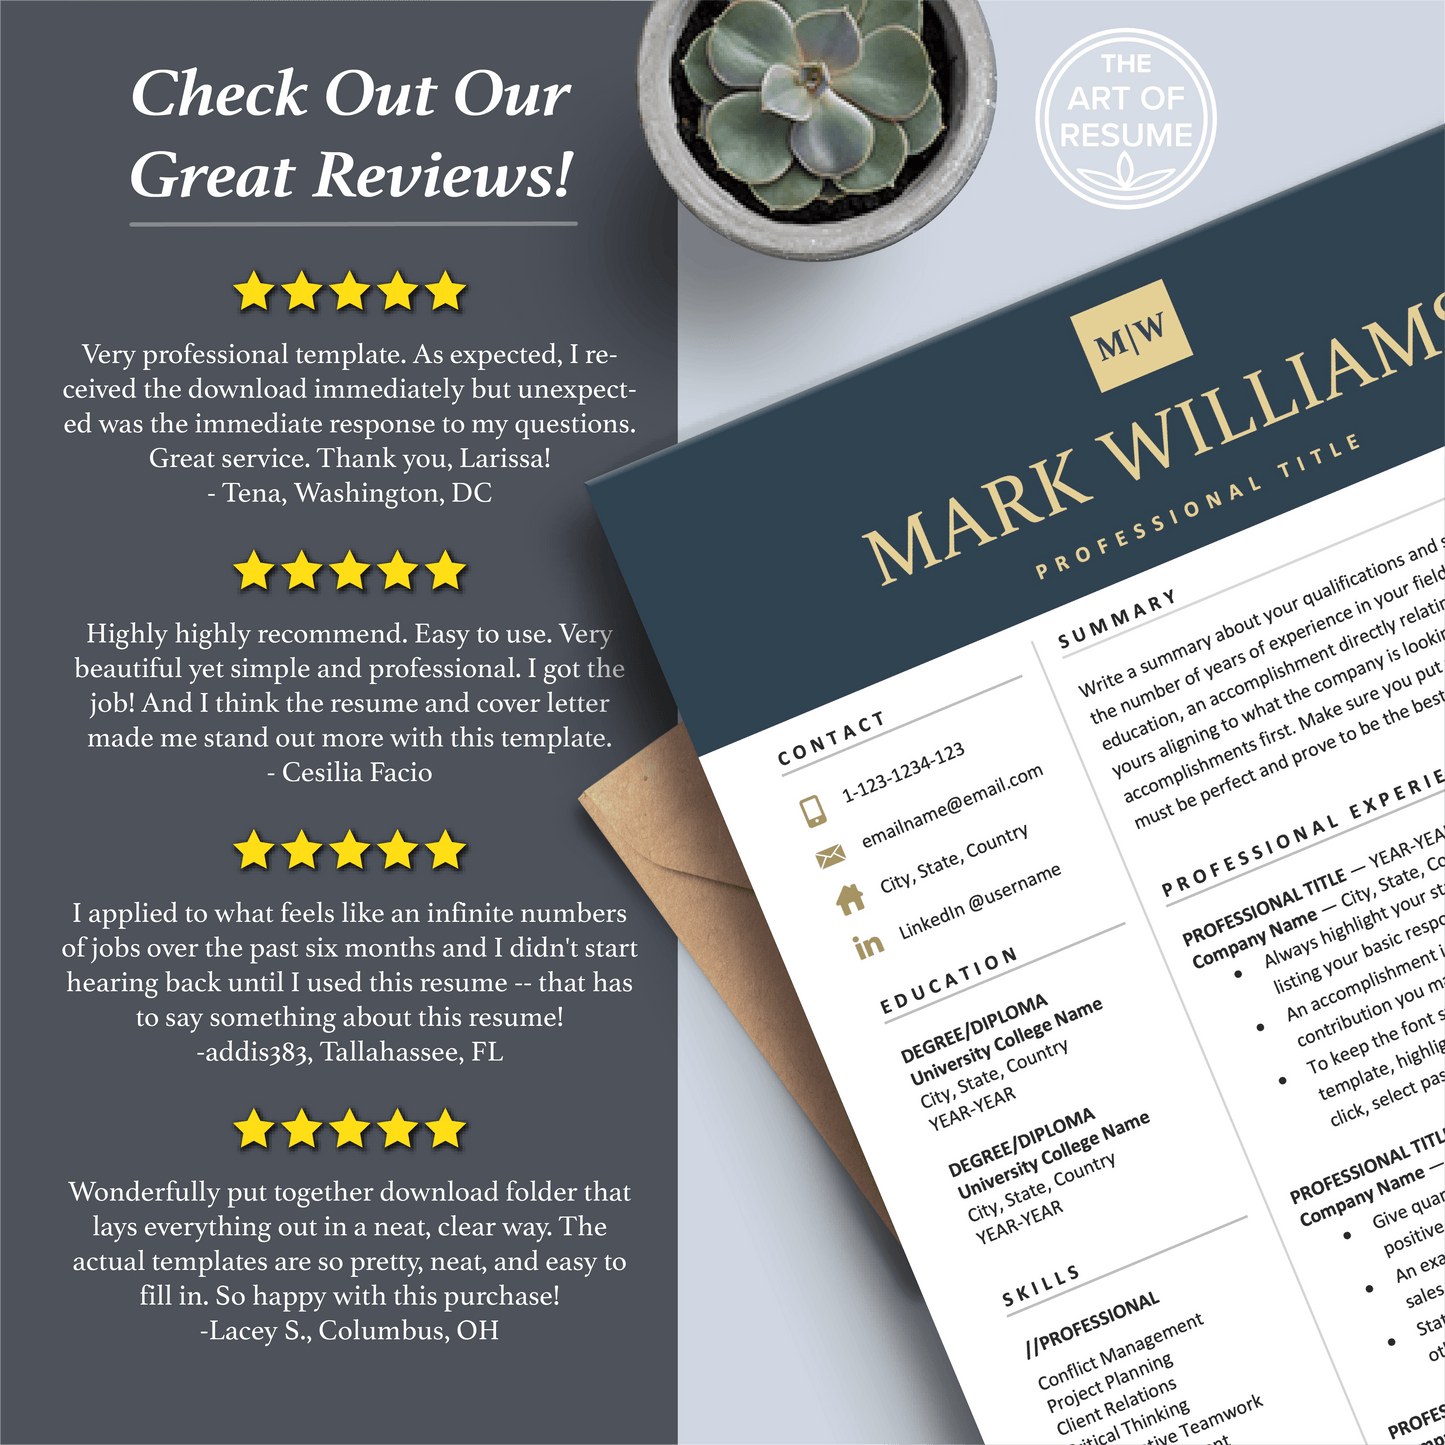 The Art of Resume Templates | Professional Best Resume CV Templates Online 5-Star Reviews